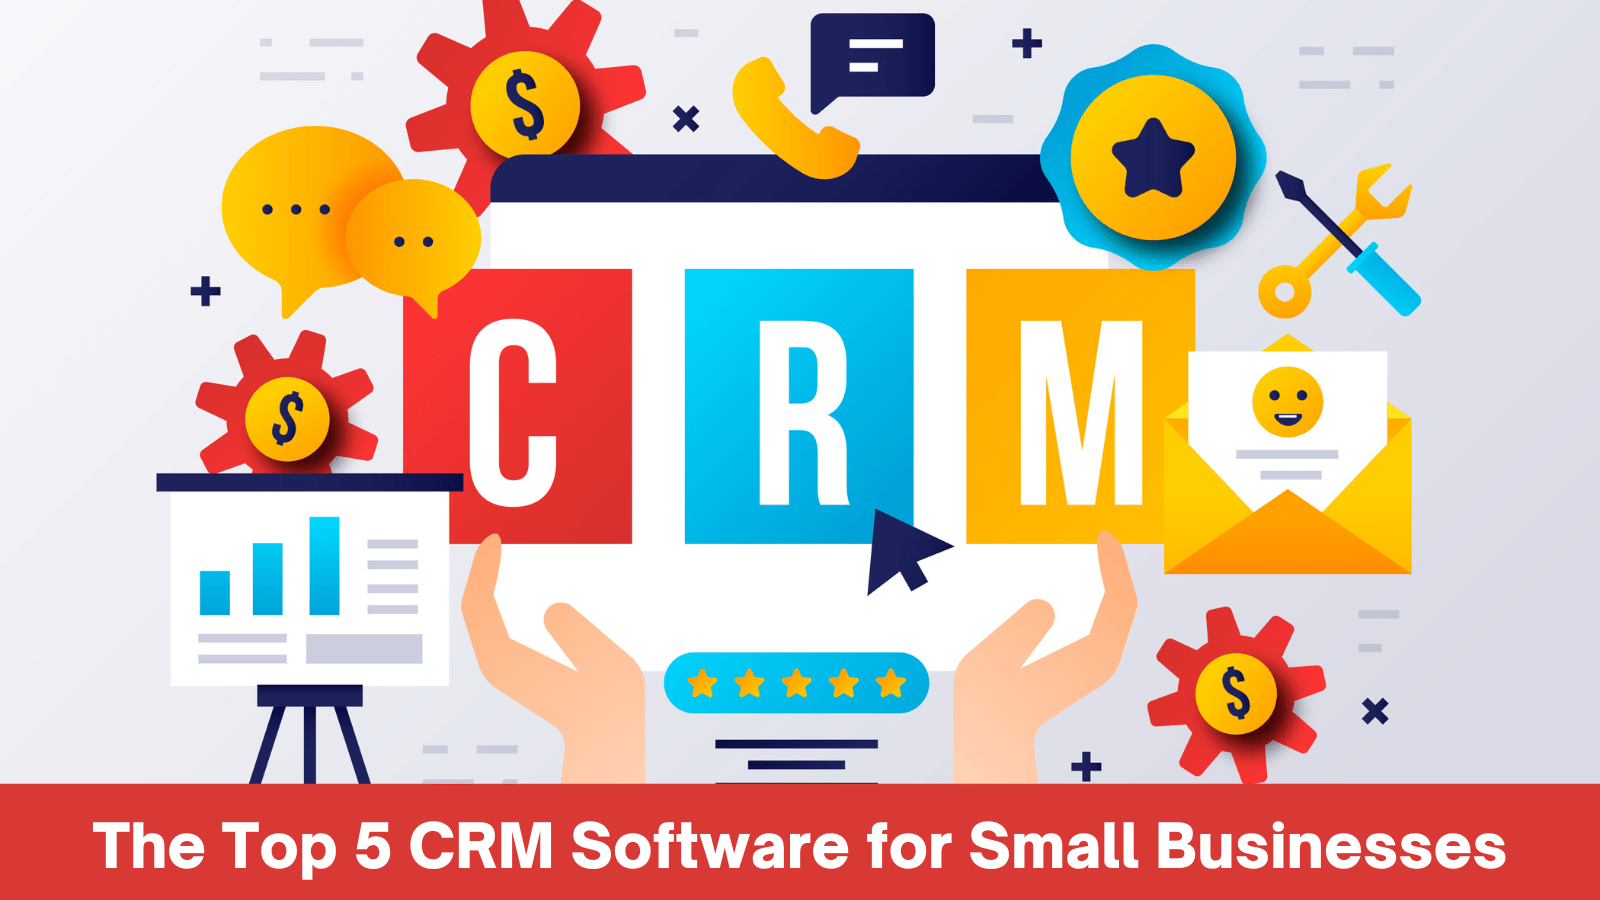 The Top 5 CRM Software for Small Businesses